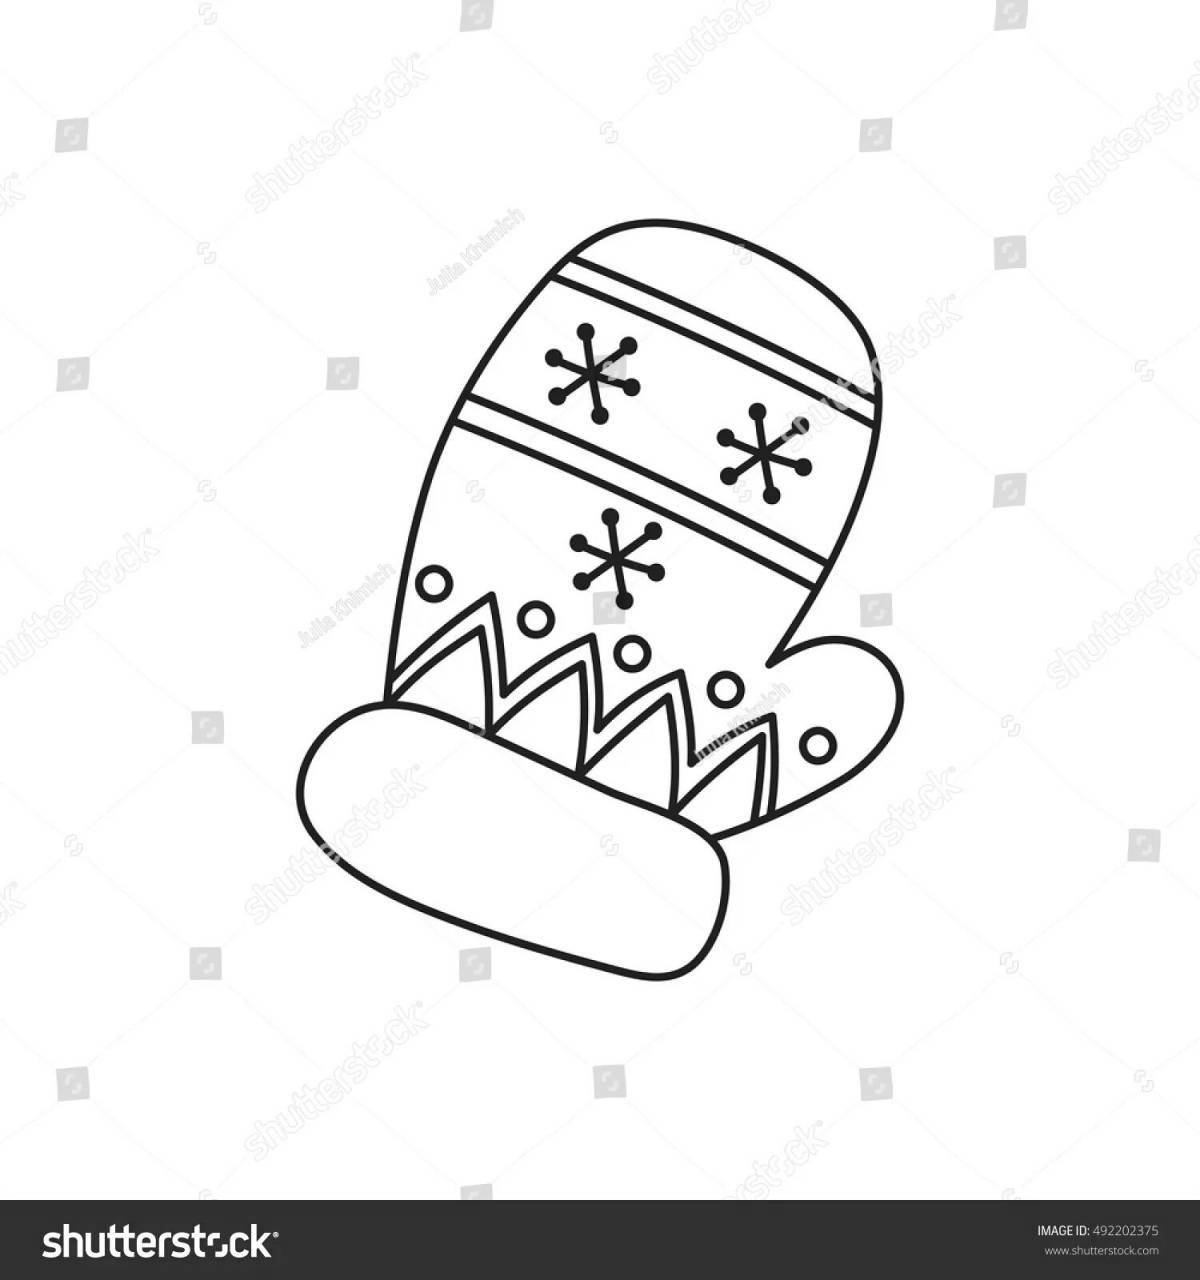 Coloring page glamor patterned mitten